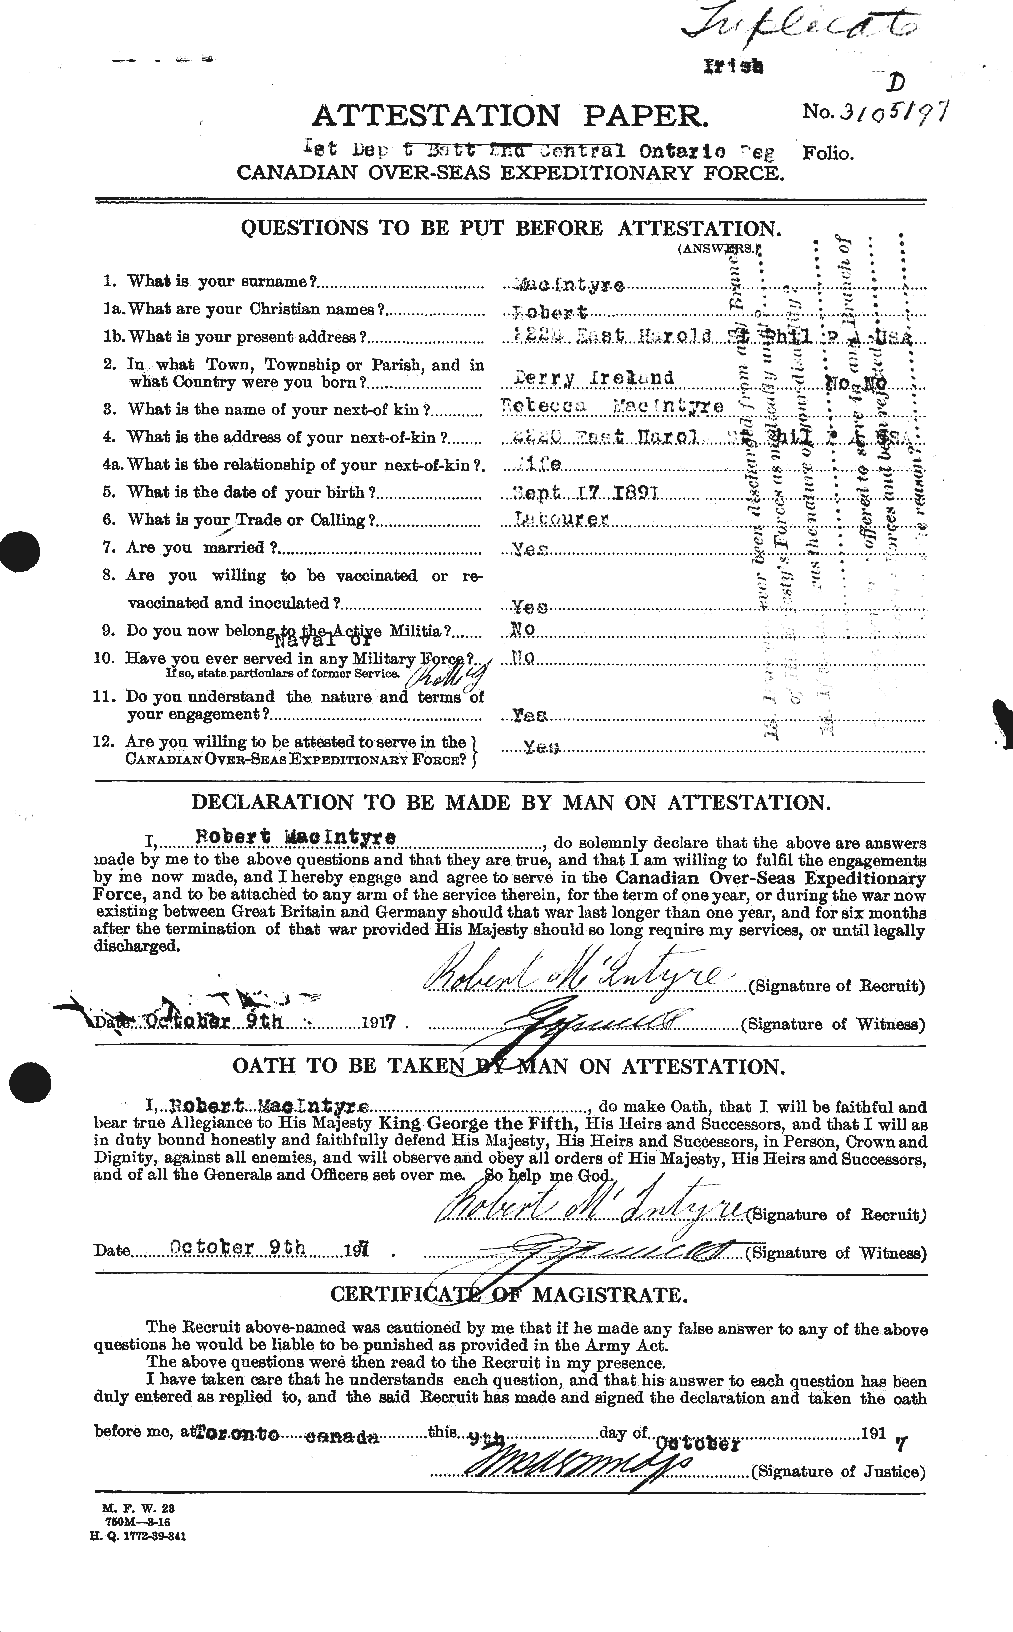 Personnel Records of the First World War - CEF 529235a